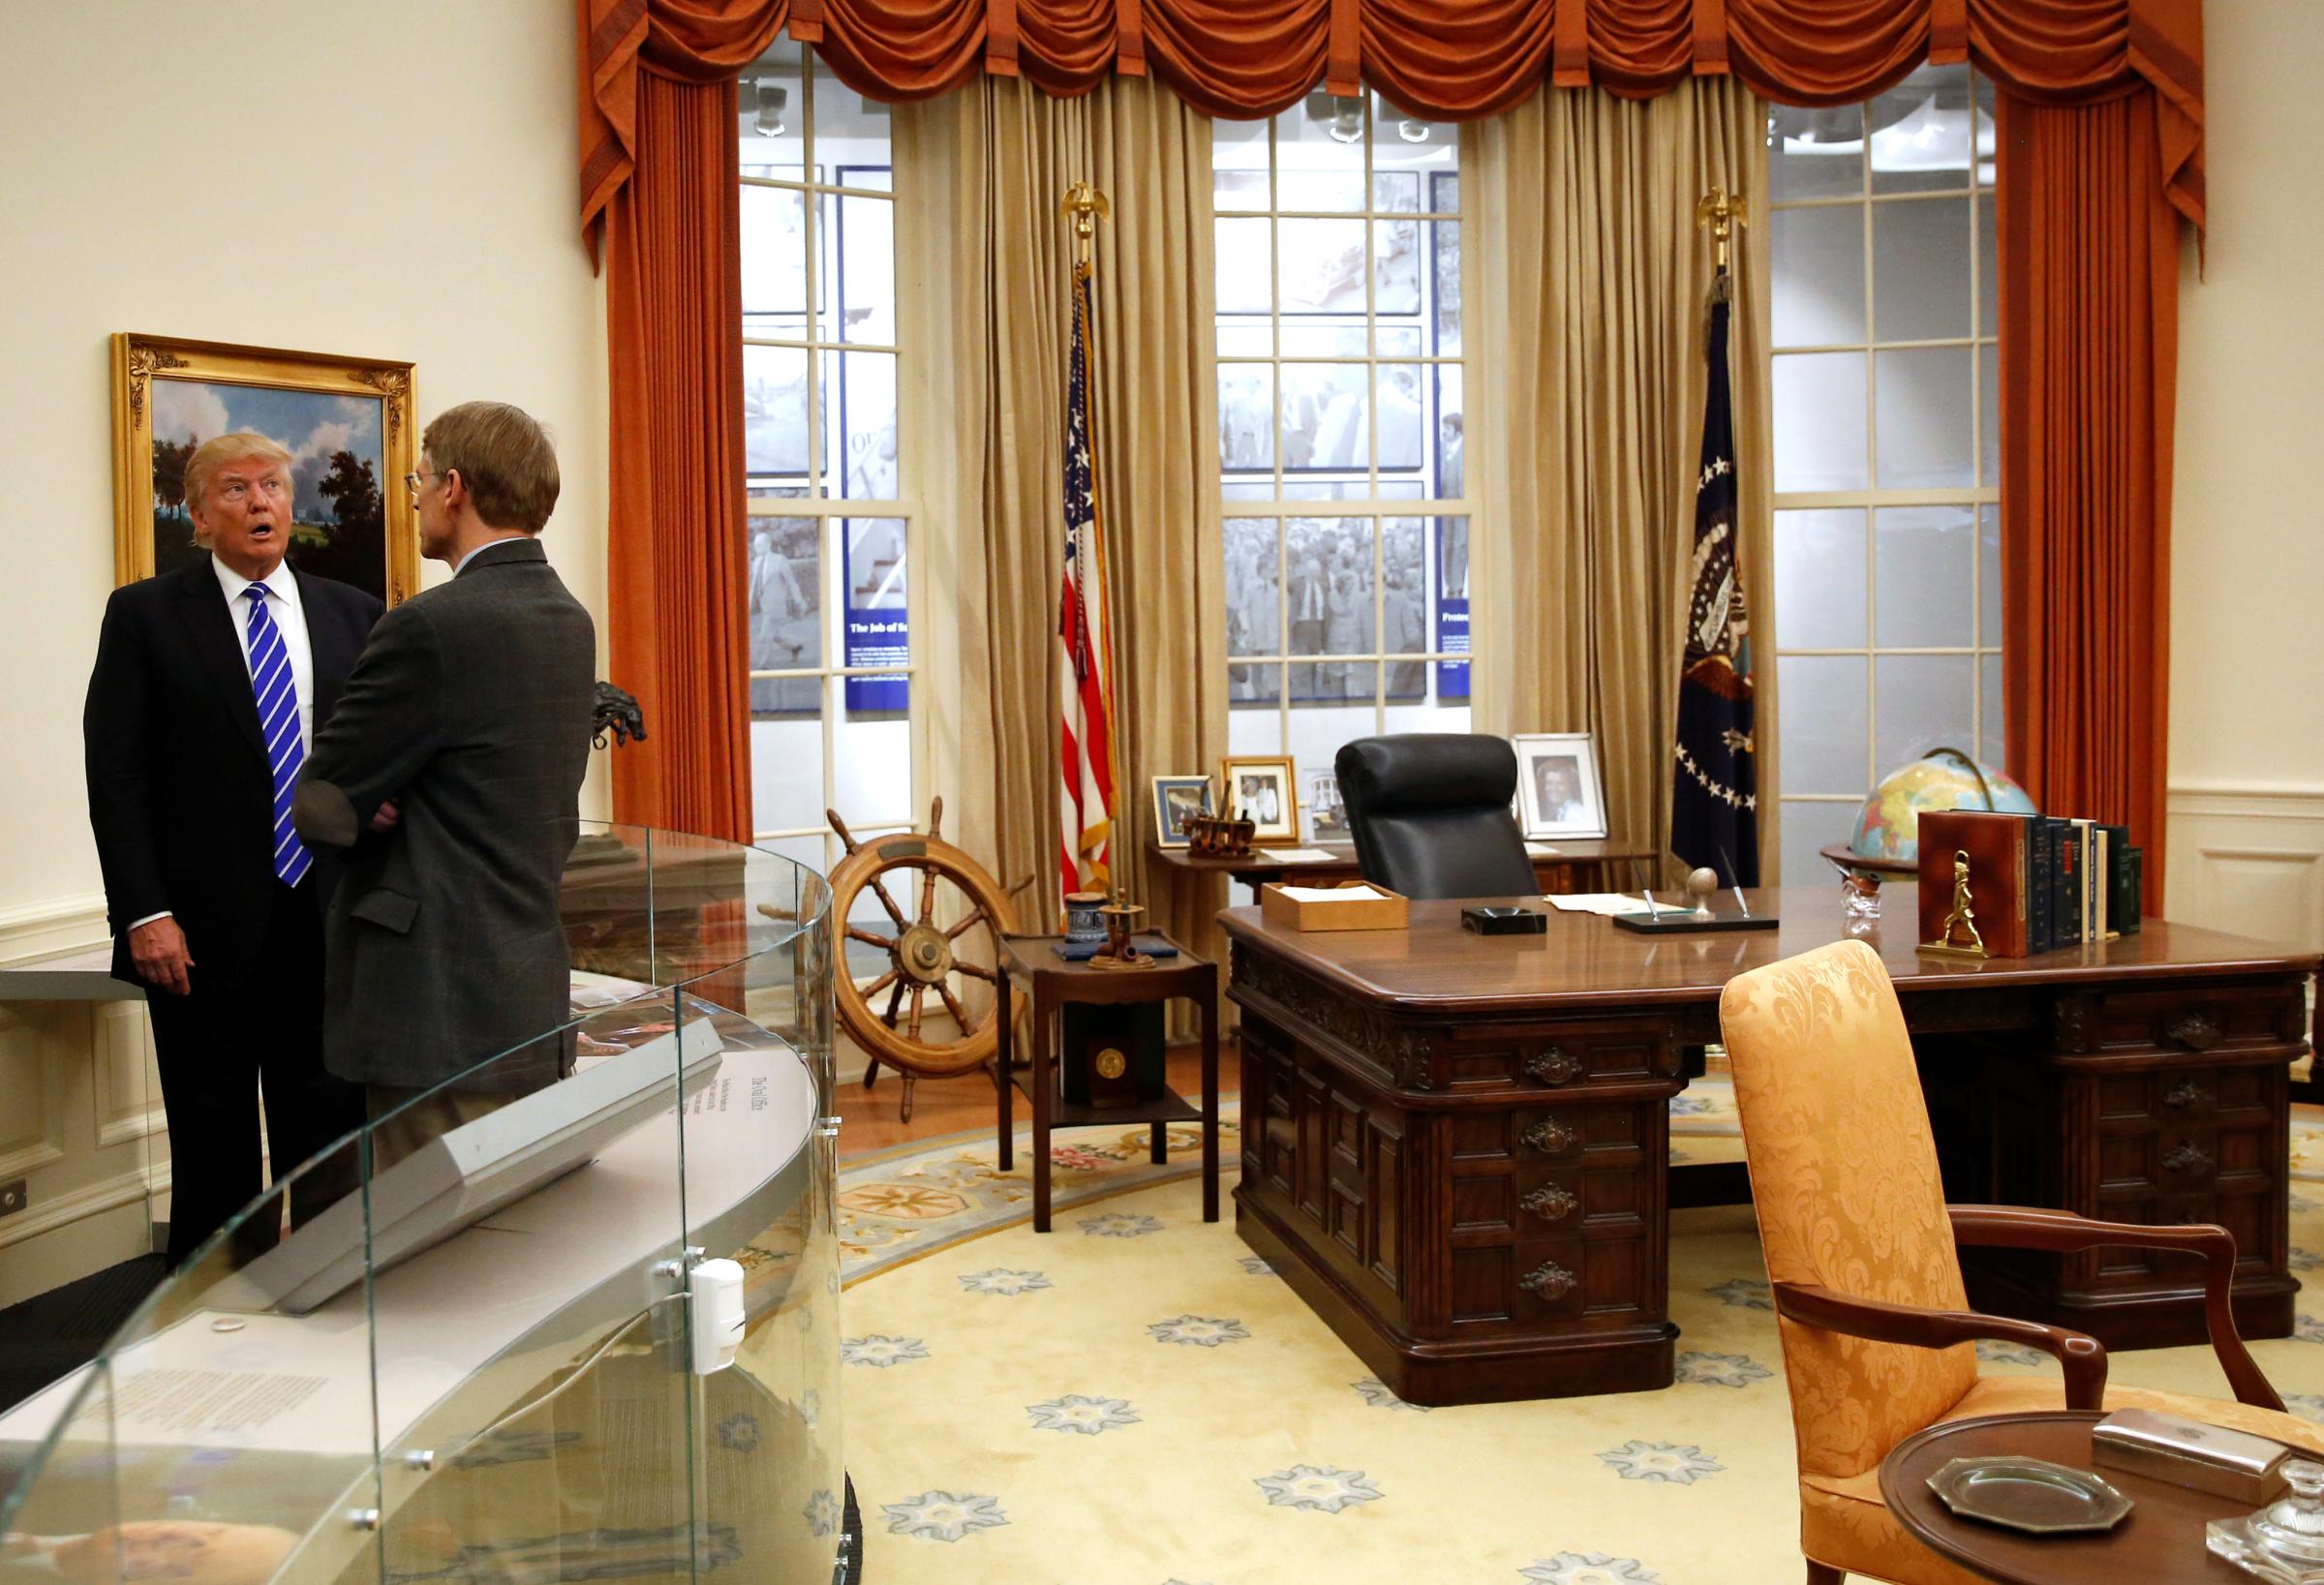 Trump views a replica of the Oval Office on a tour of the Ford Presidential Museum in Grand Rapids, Michigan, U.S.